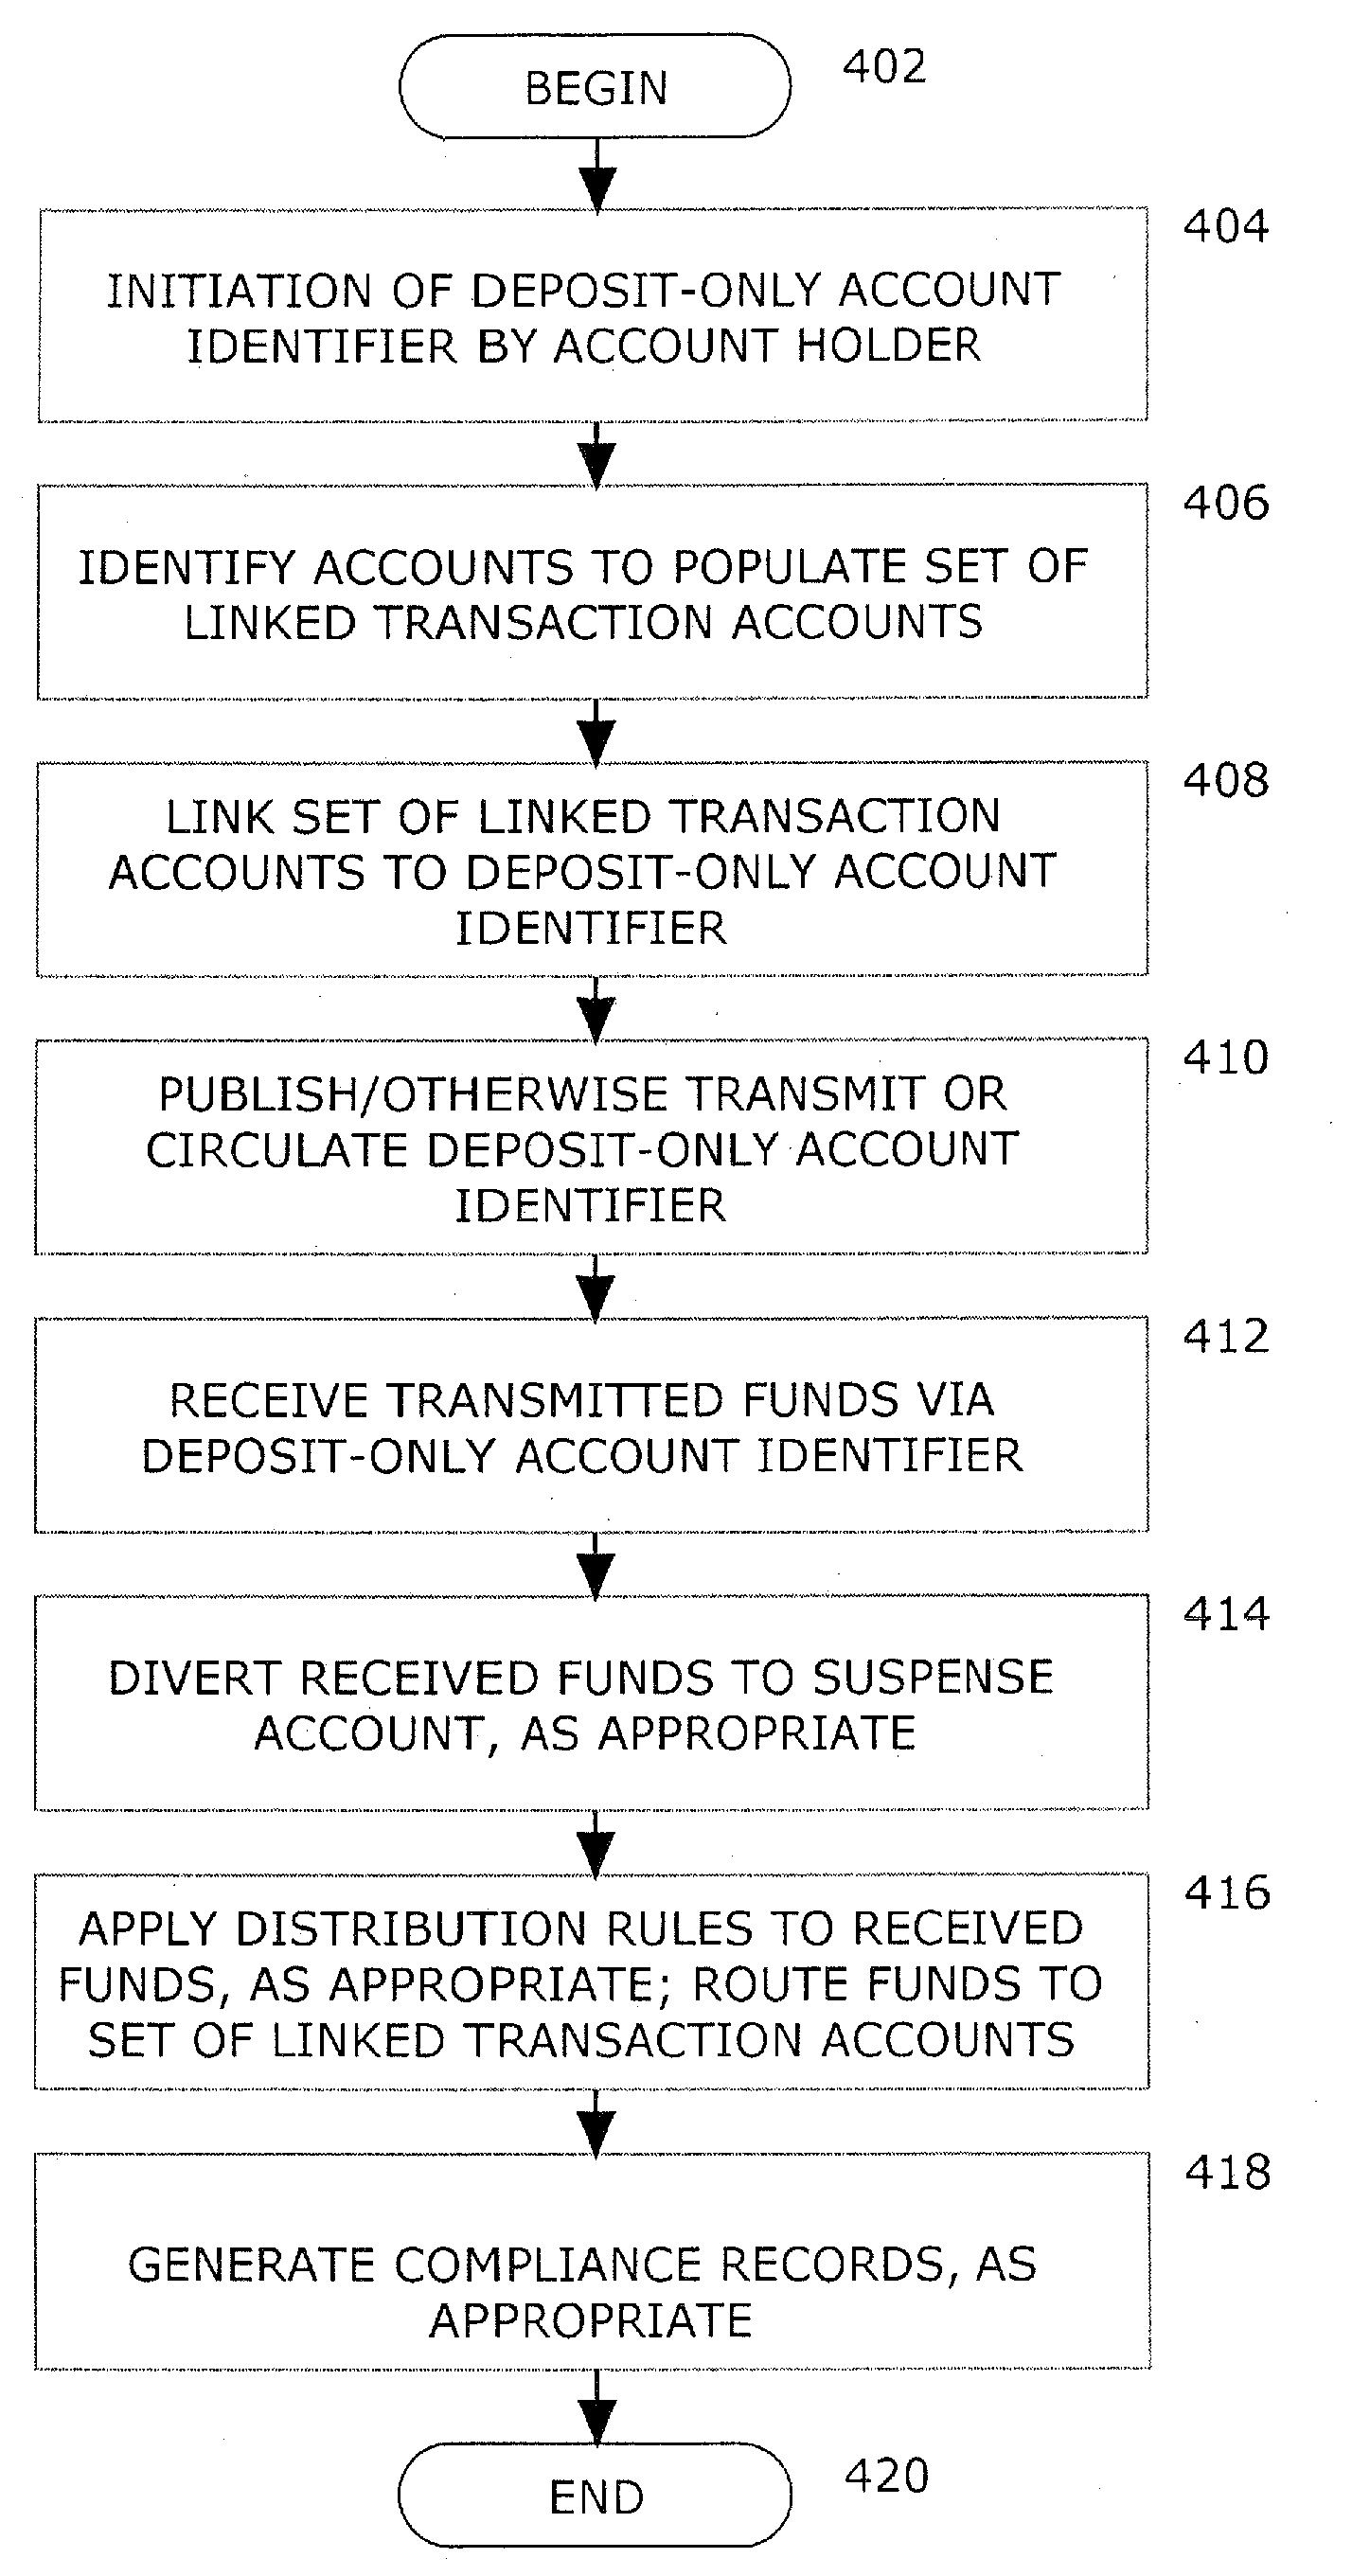 Systems and methods for generating and managing a linked deposit-only account identifier